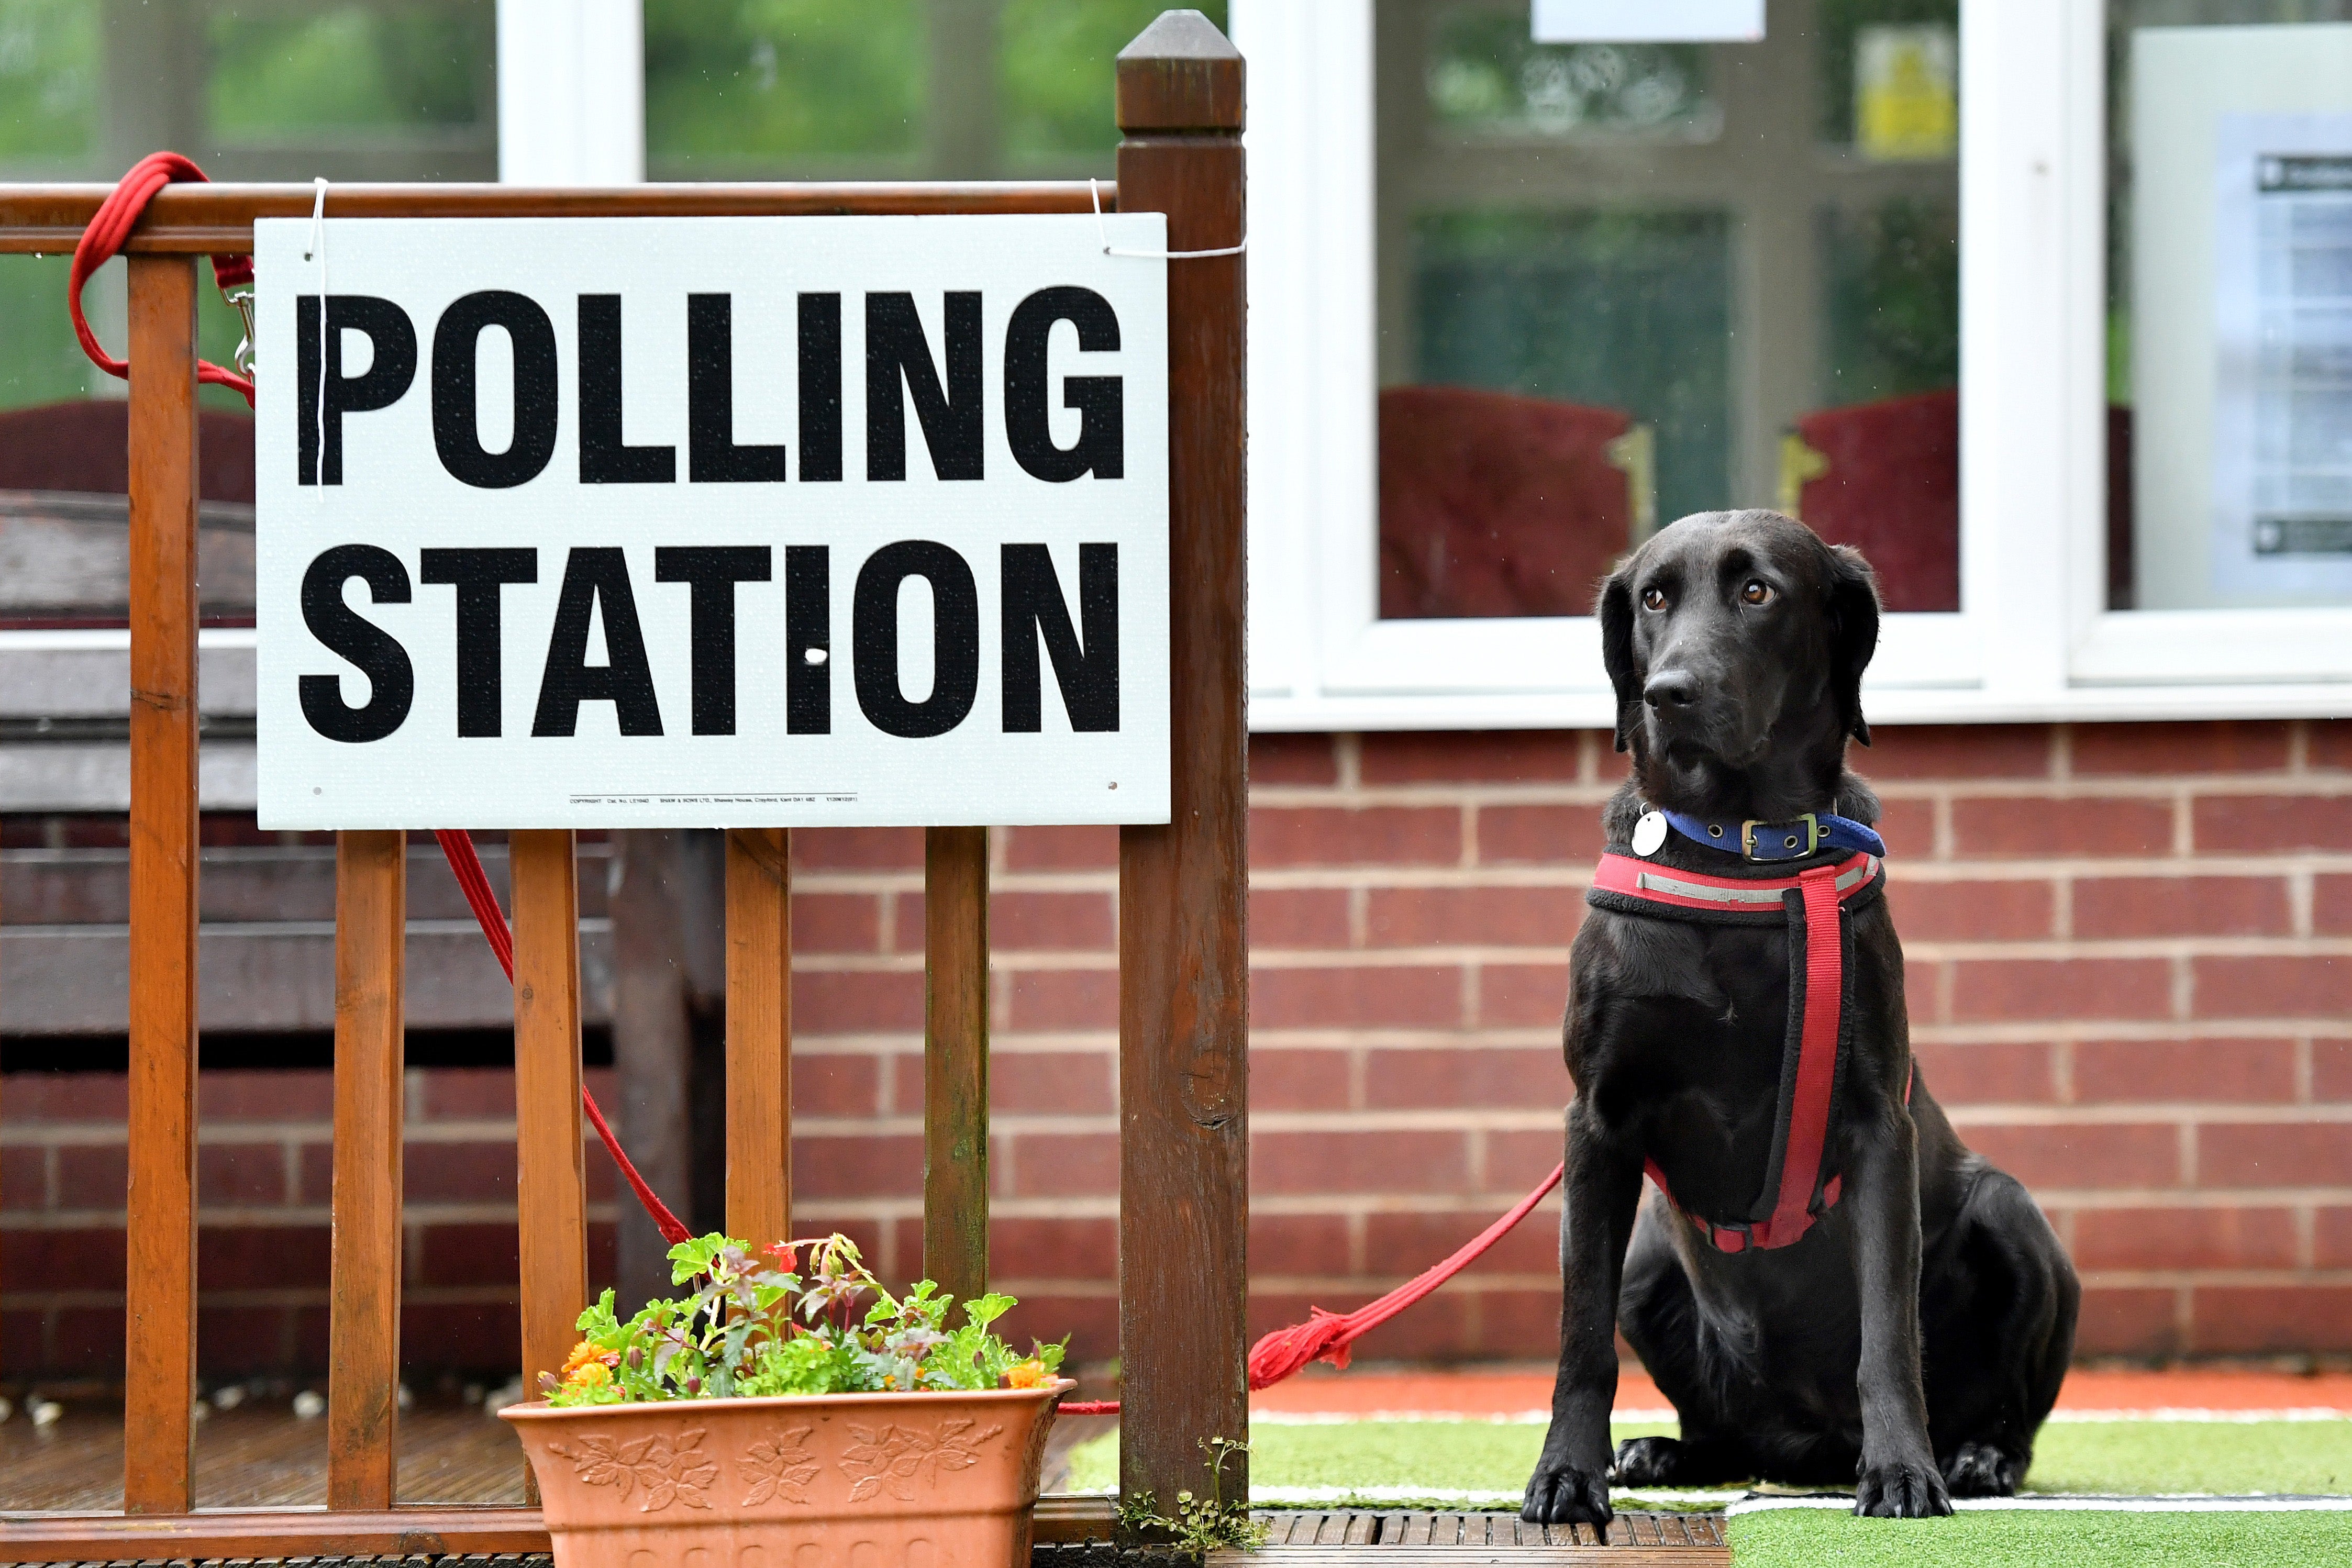 polling station, general election, labour, conseratives, dogs, chatting, selfies: everything you can and cannot do at the polling station on general election day